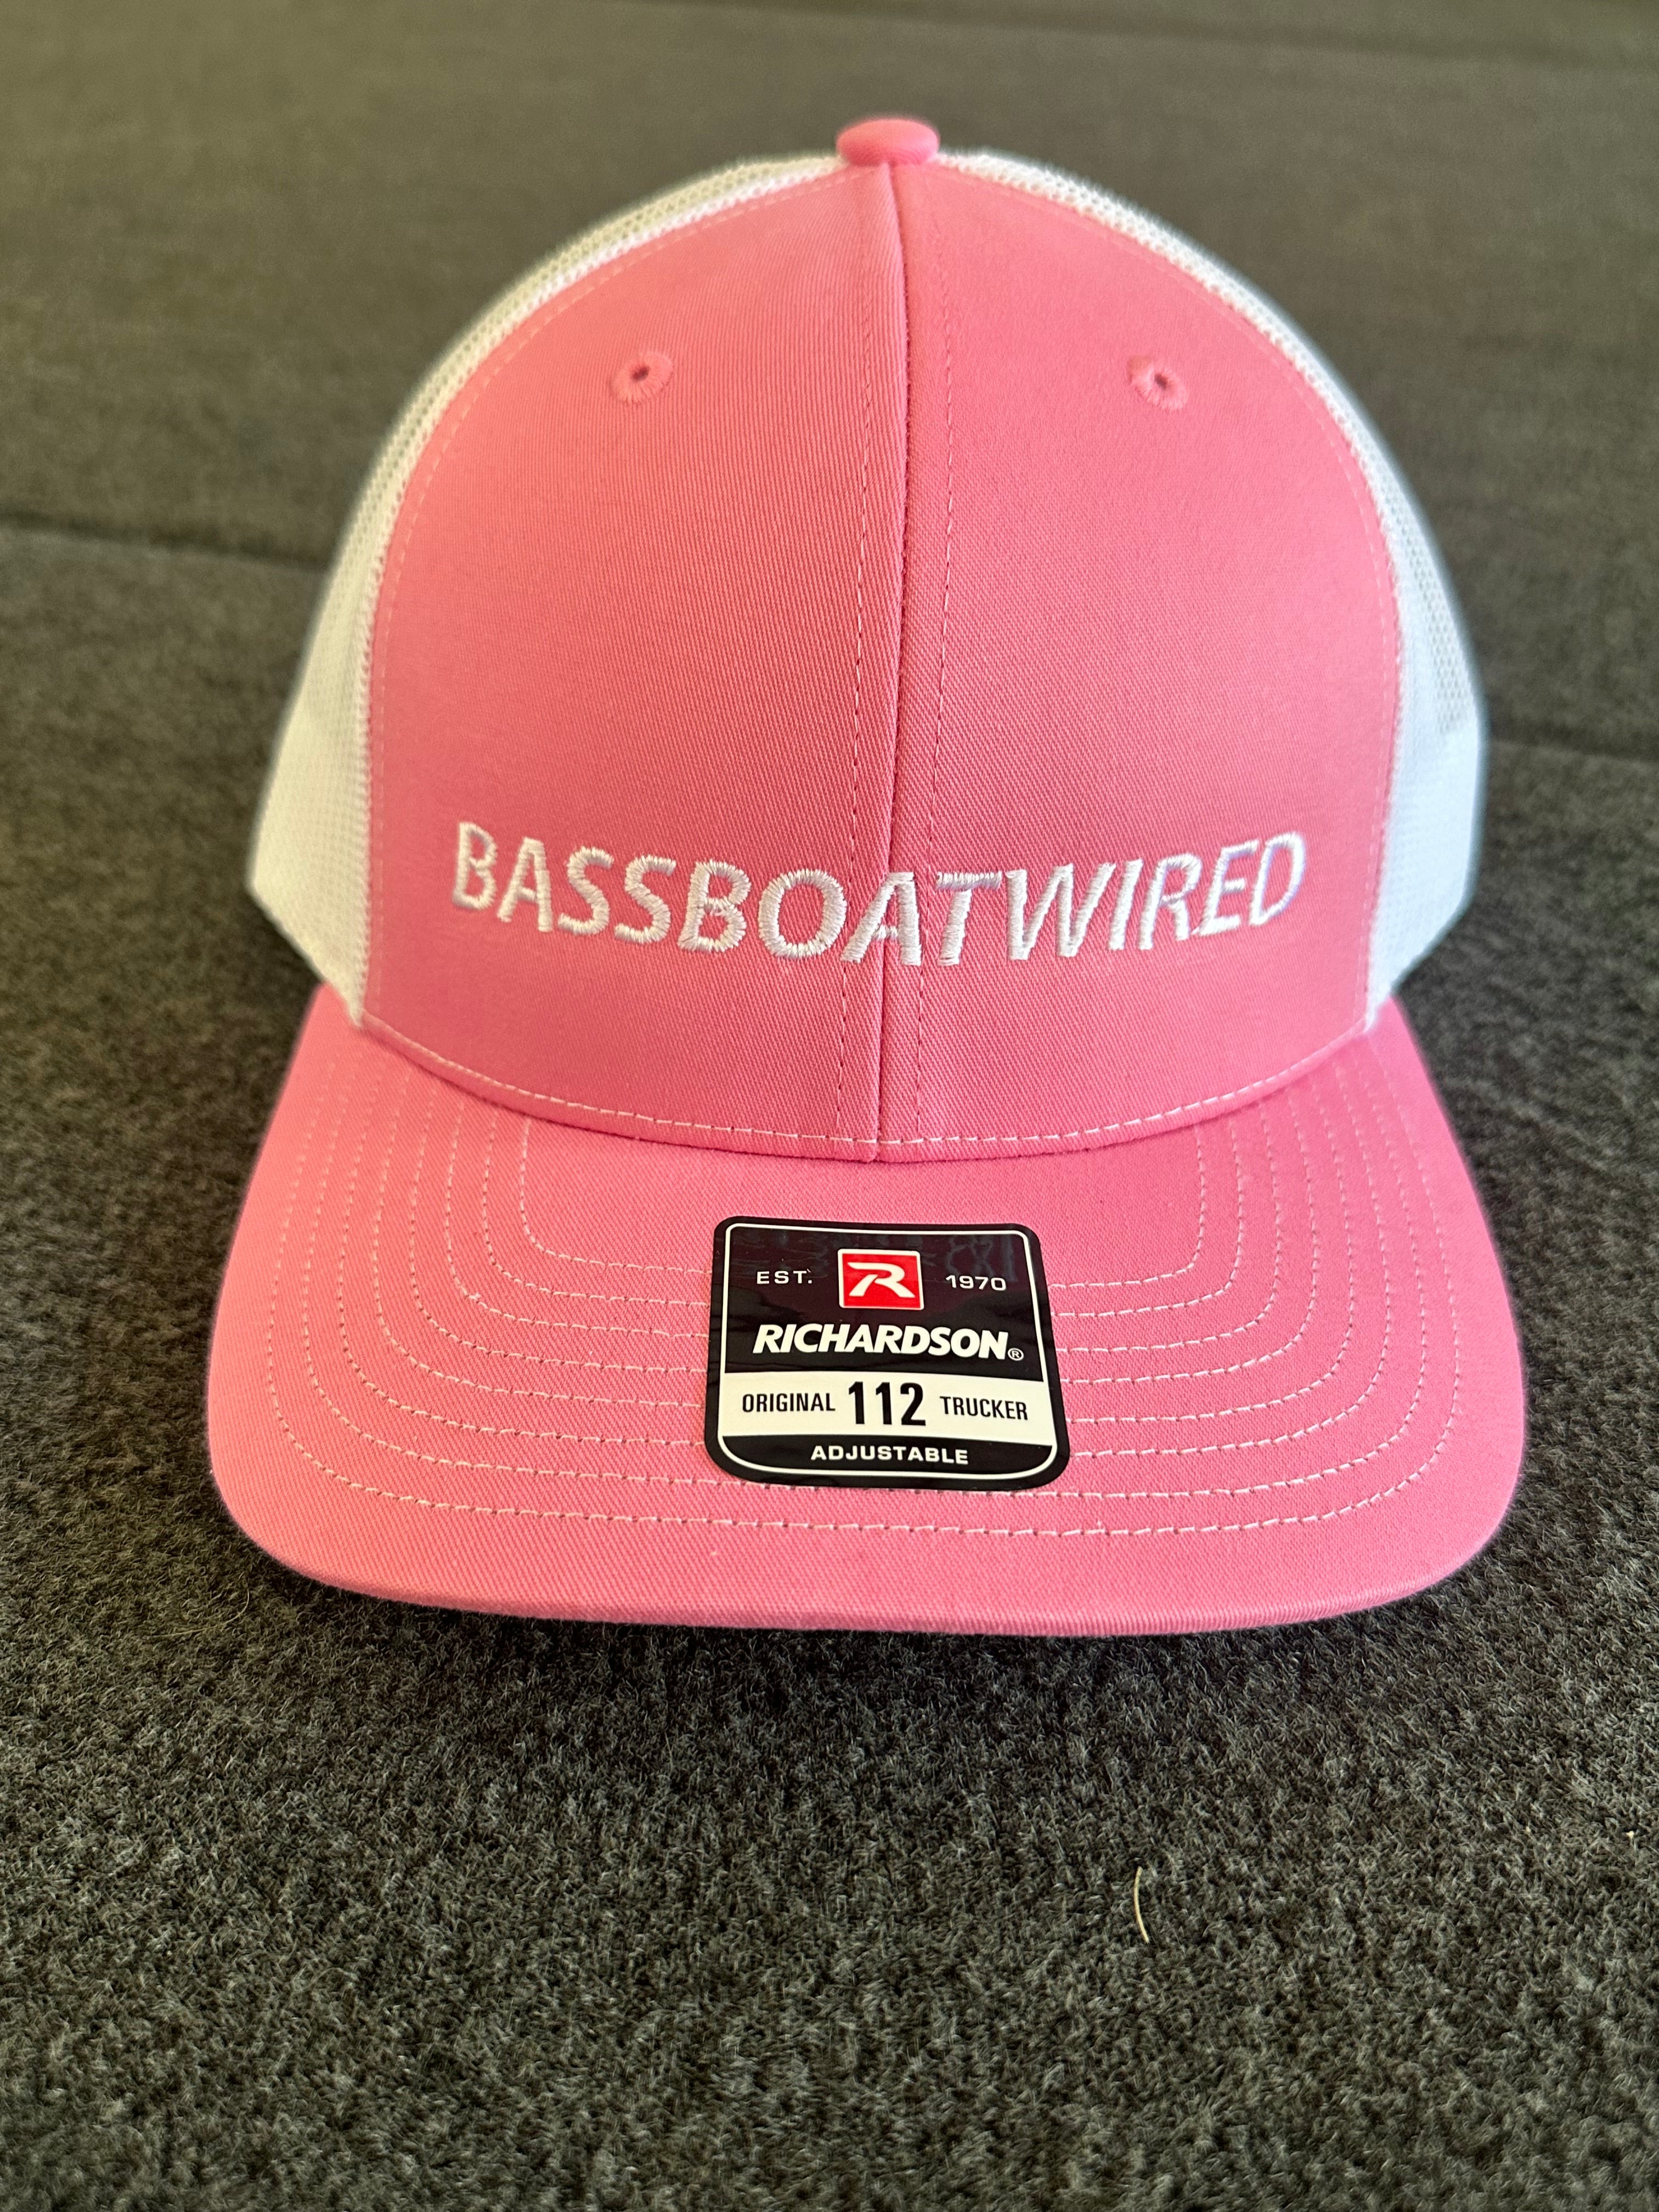 Bass Boat Wired Hats